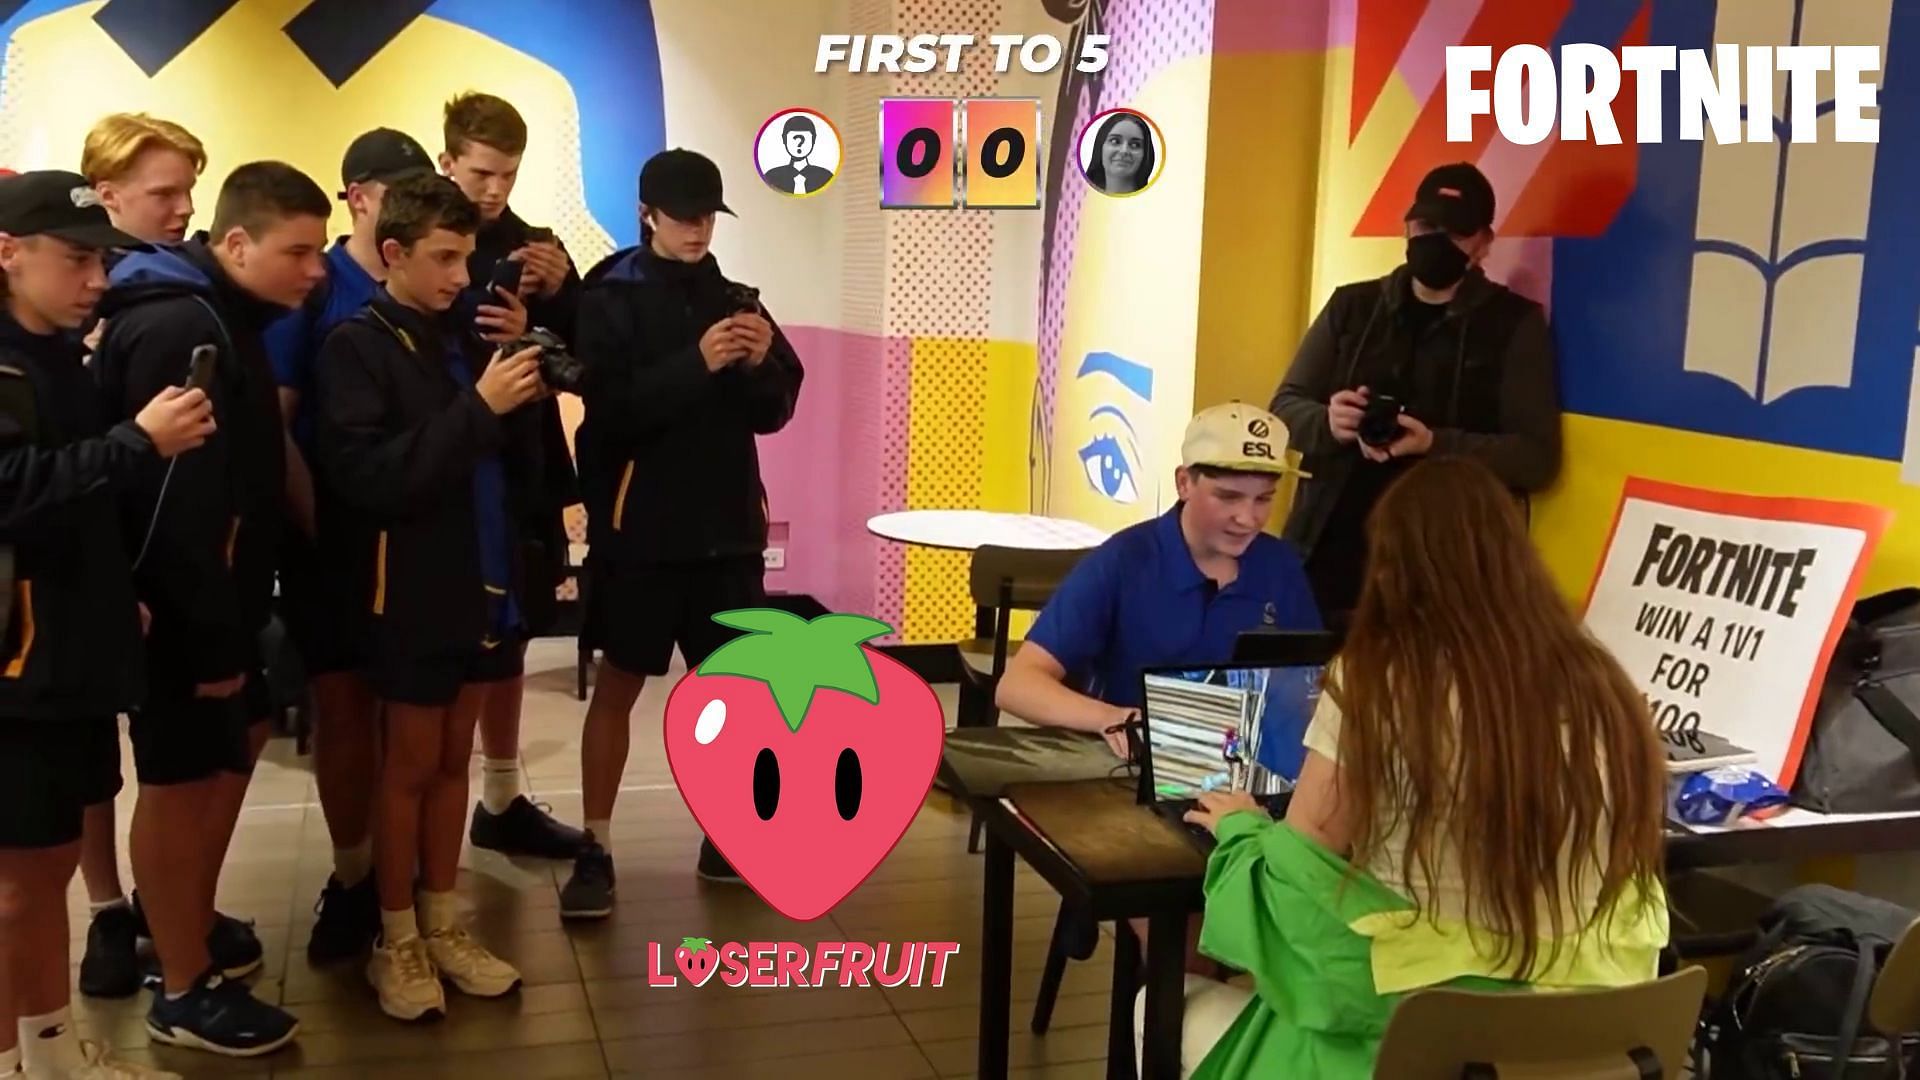 Loserfruit went out in Melbourne to 1v1 strangers in exchange for $100 (Image via YouTube/Loserfruit)